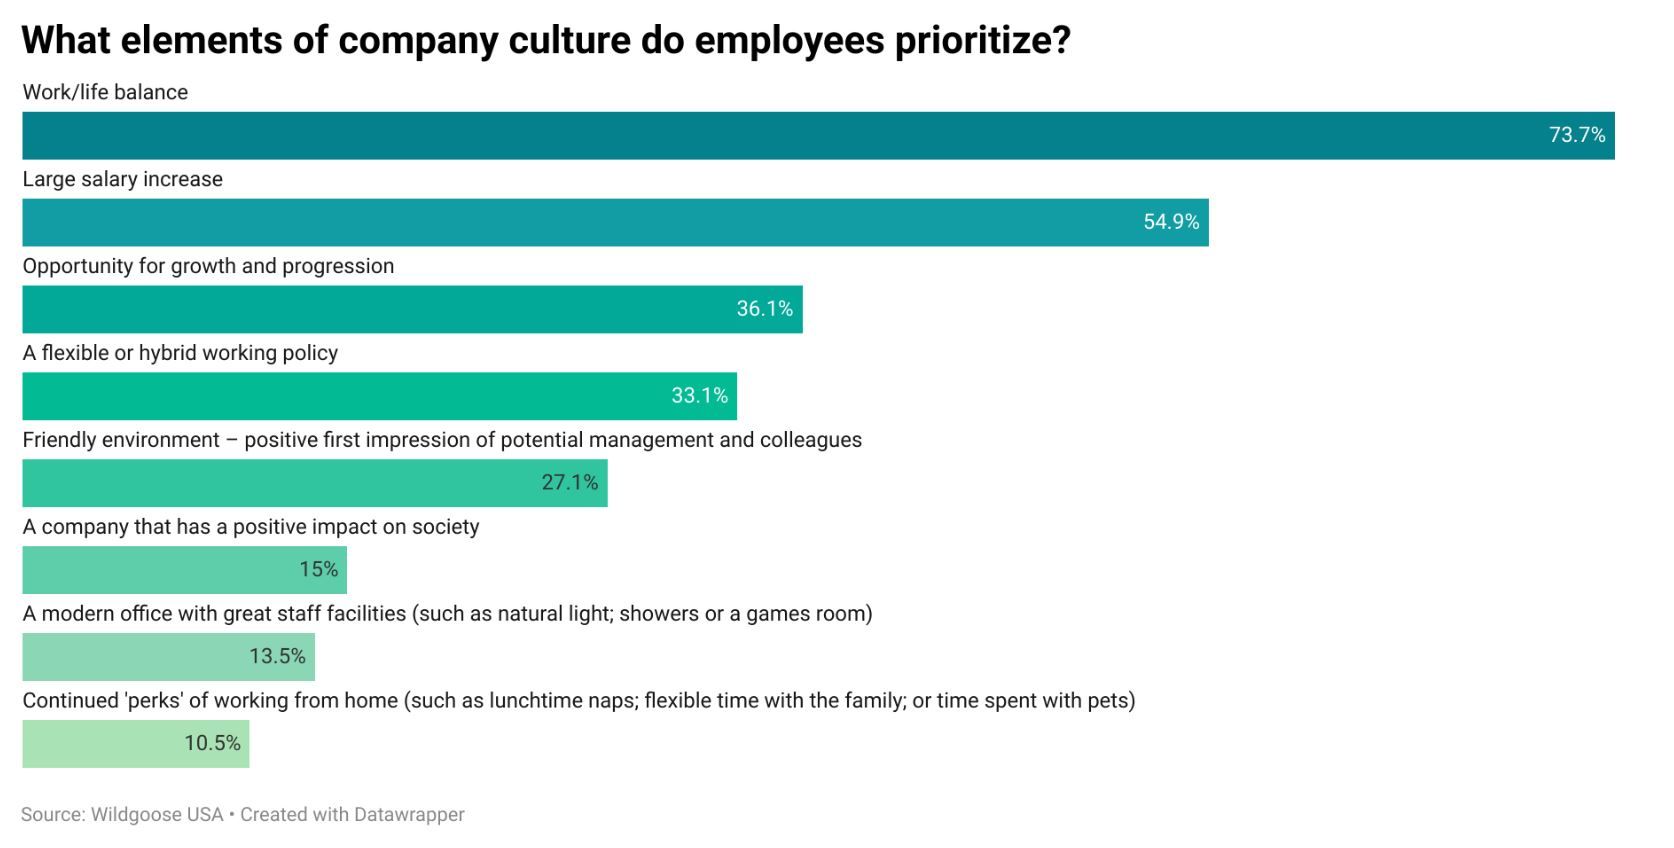 Elements employees prioritize